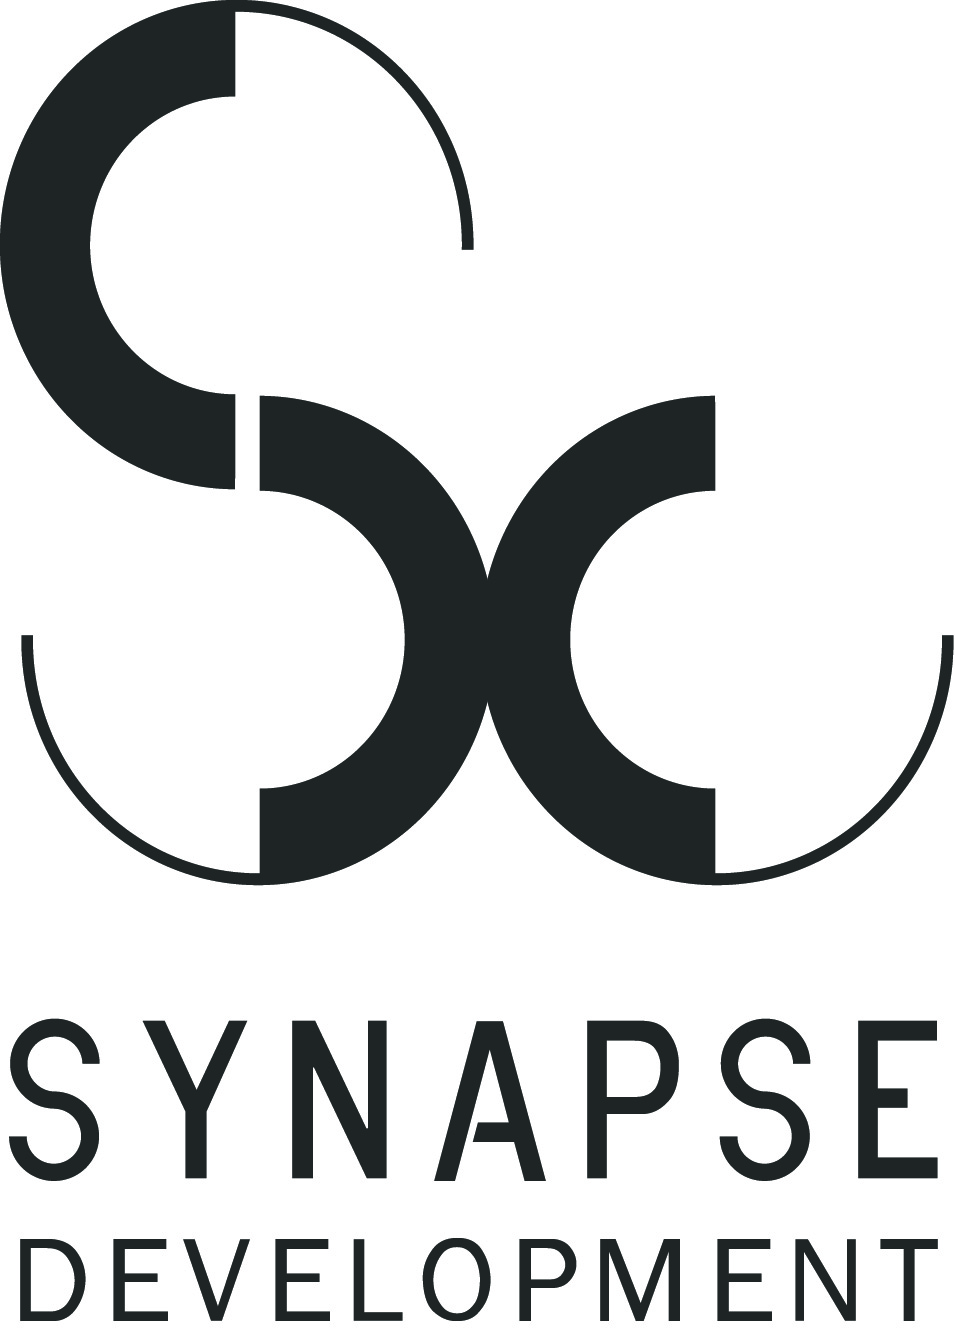 http://pressreleaseheadlines.com/wp-content/Cimy_User_Extra_Fields/Synapse Residential Group/synapse_development_logo.jpg